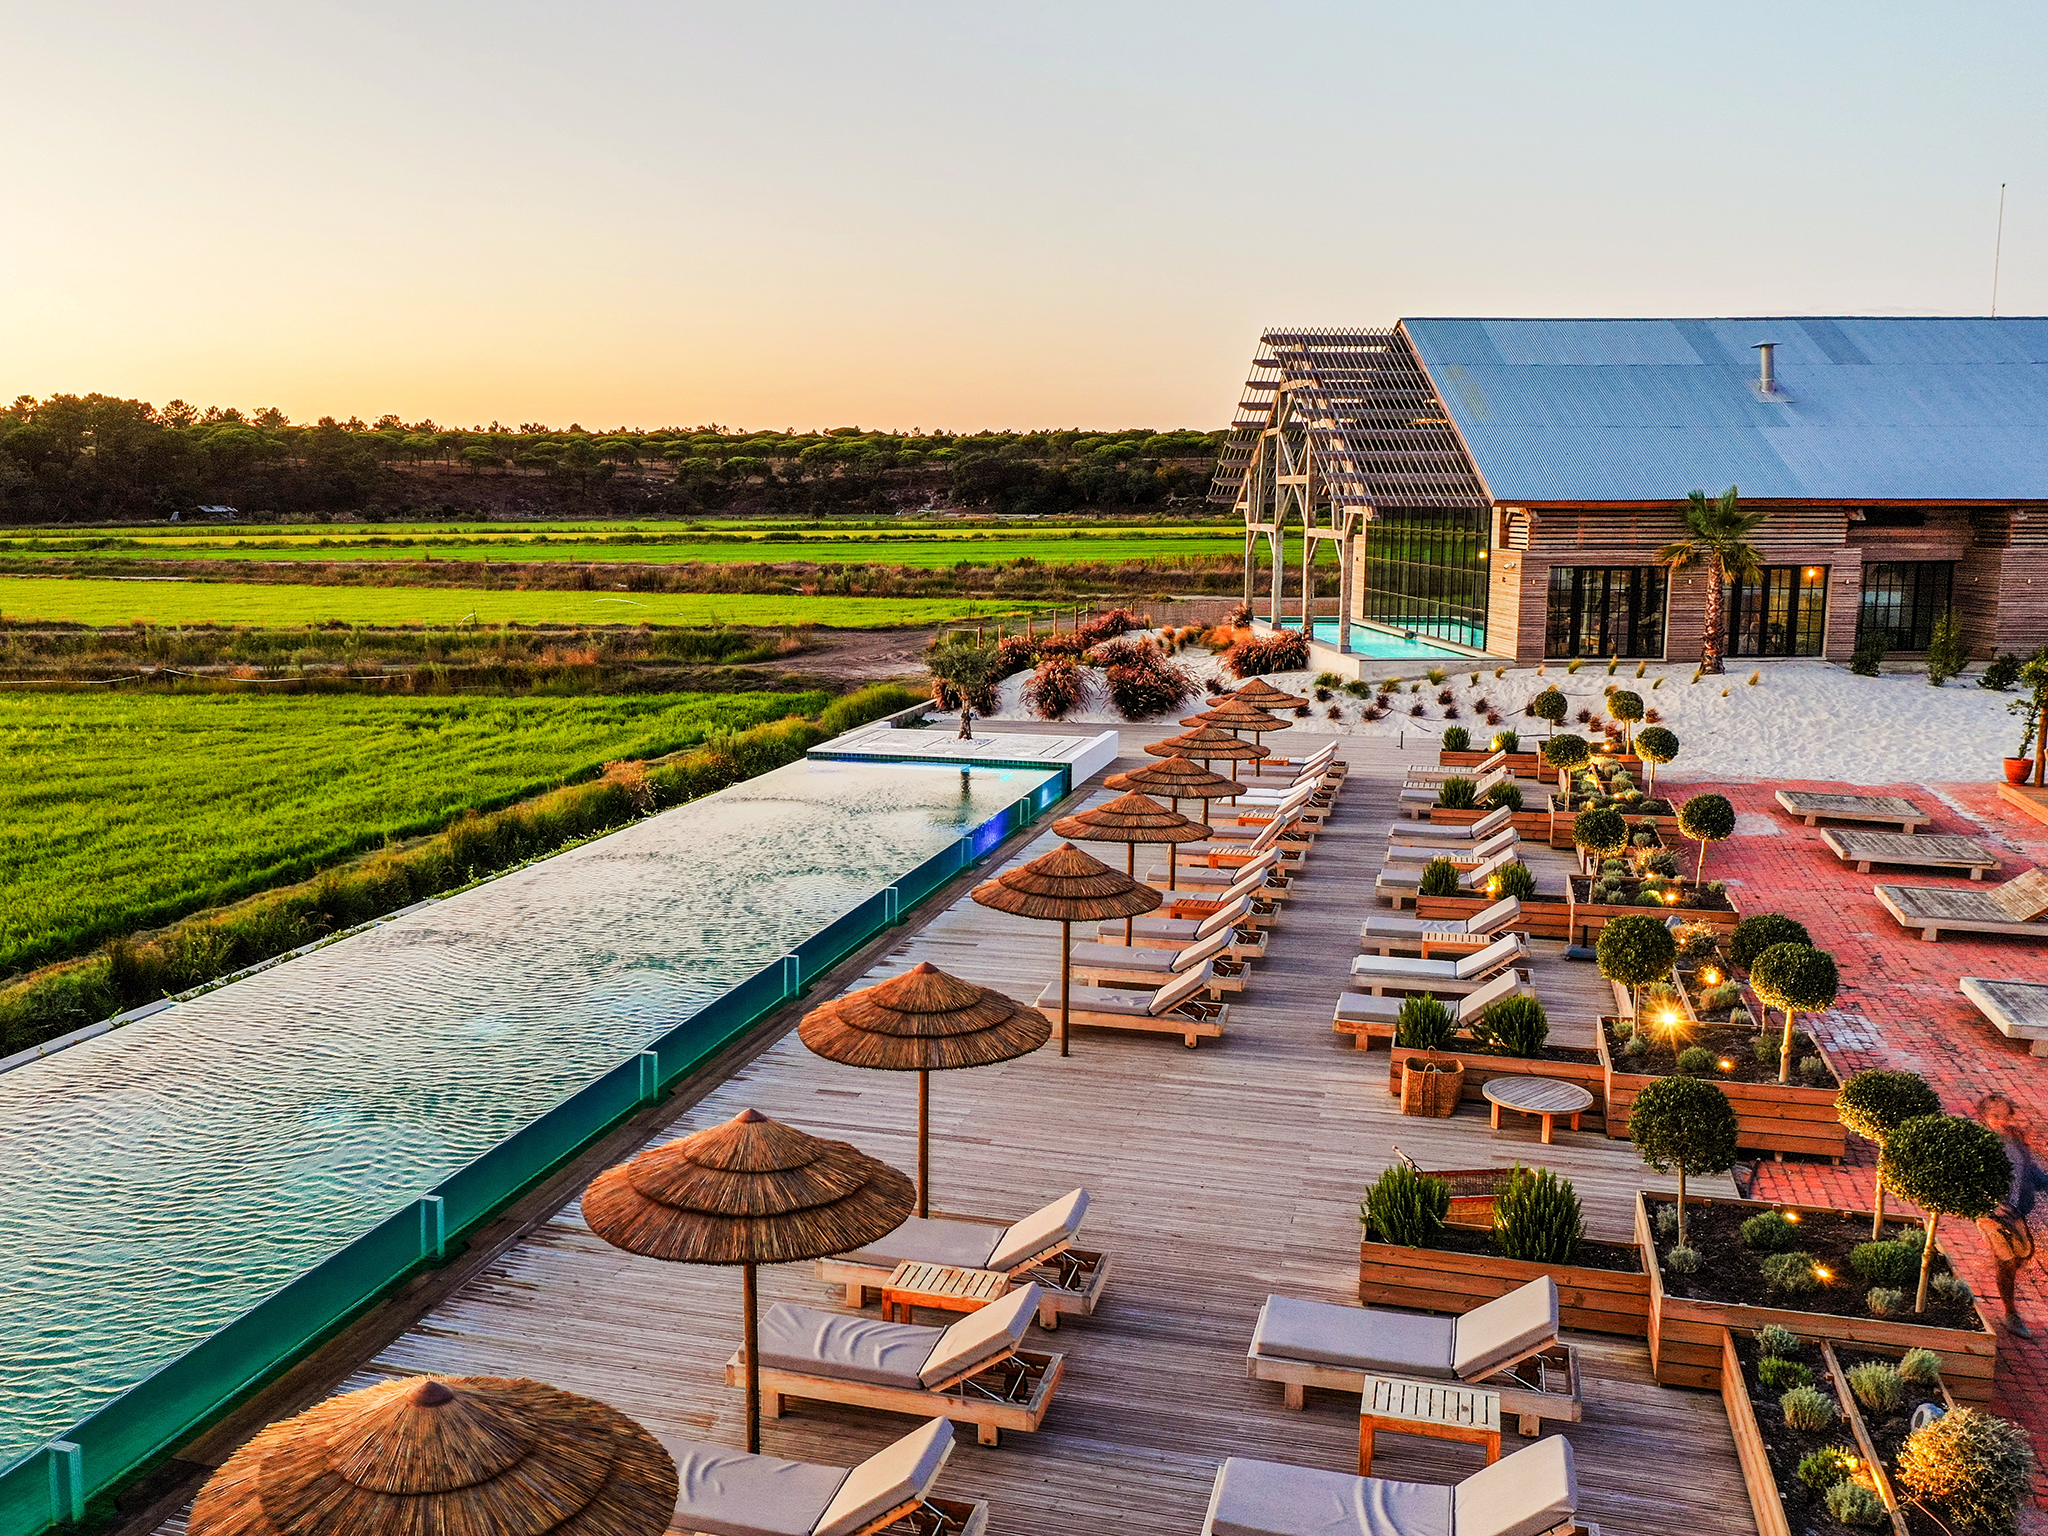 This stylish boutique resort offers a relaxing spa experience